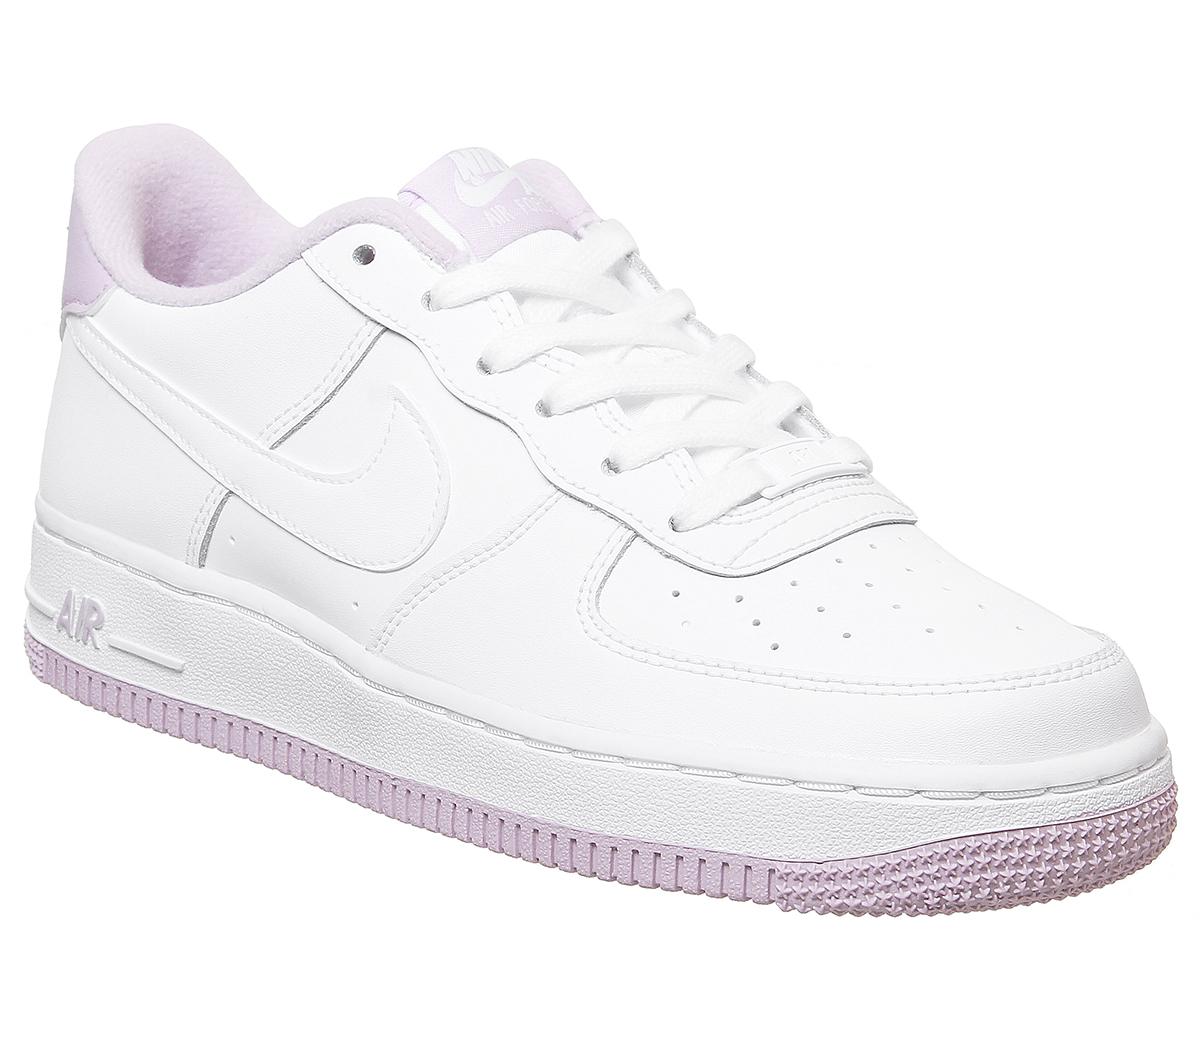 NikeAir Force 1 TrainersWhite White Iced Lilac